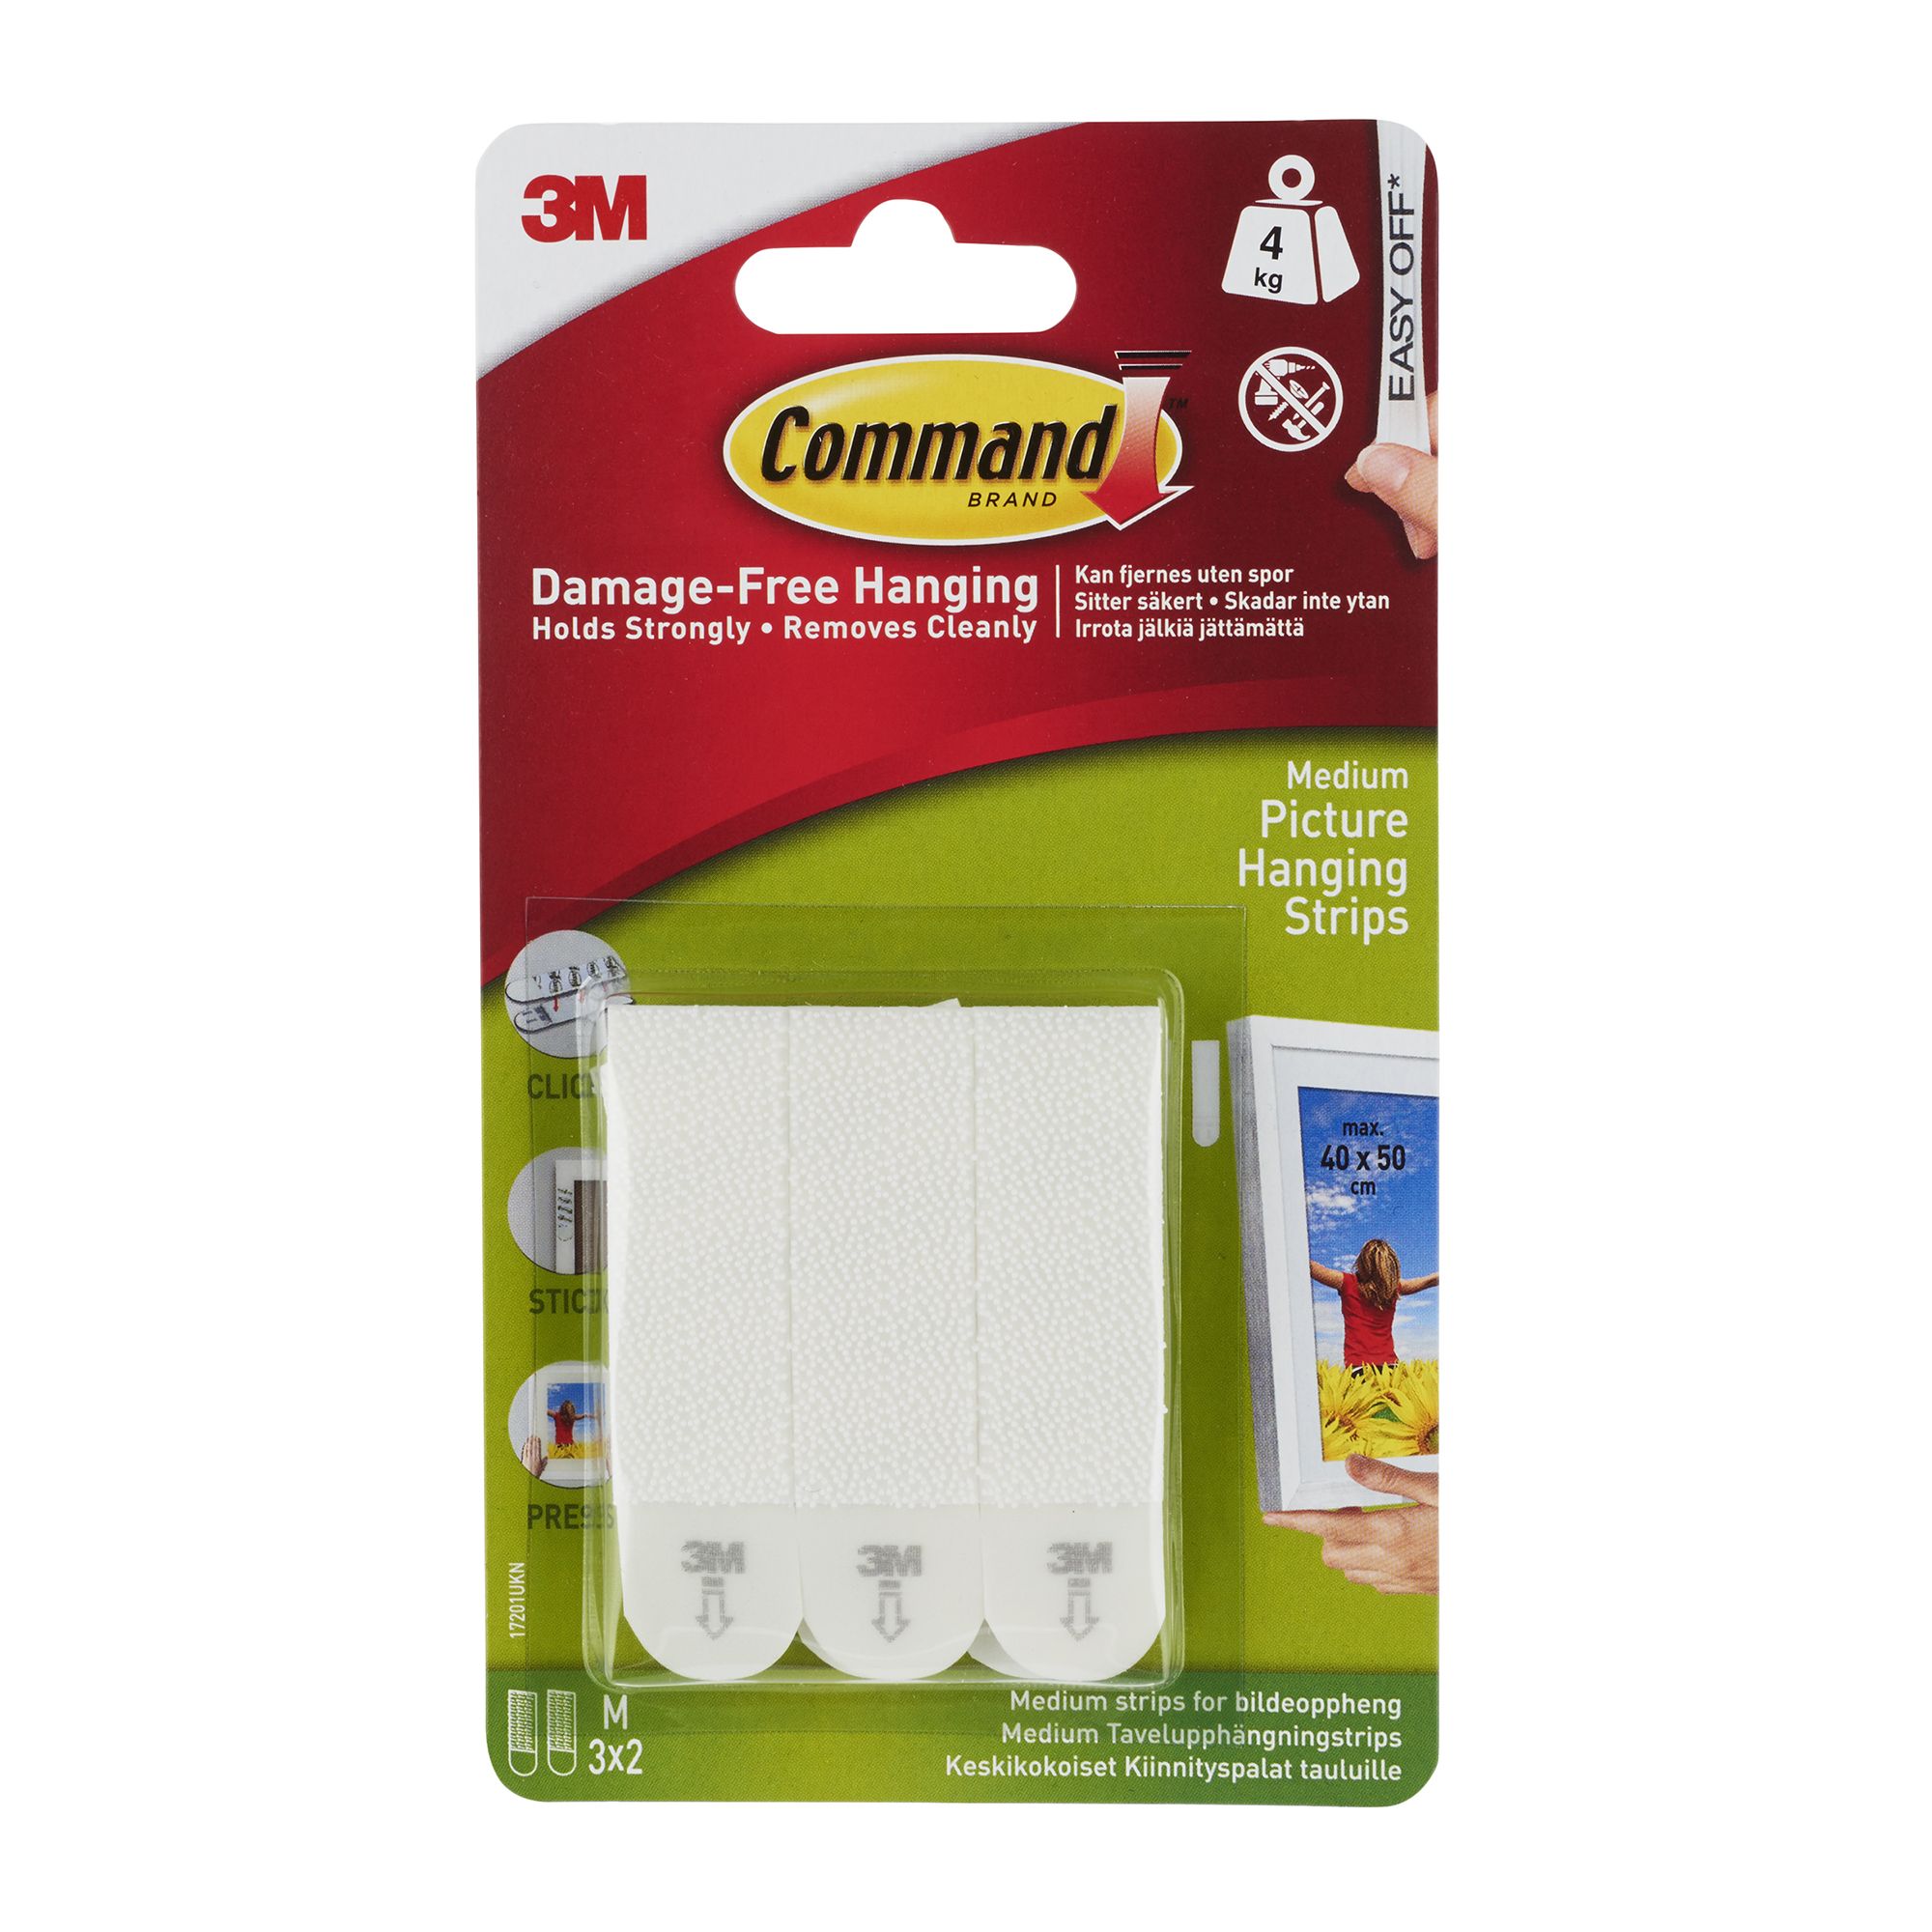 Command Large Refill Adhesive Strips, Damage Free Hanging Wall Adhesive  Strips for Large Indoor Wall Hooks, No Tools Removable Adhesive Strips for